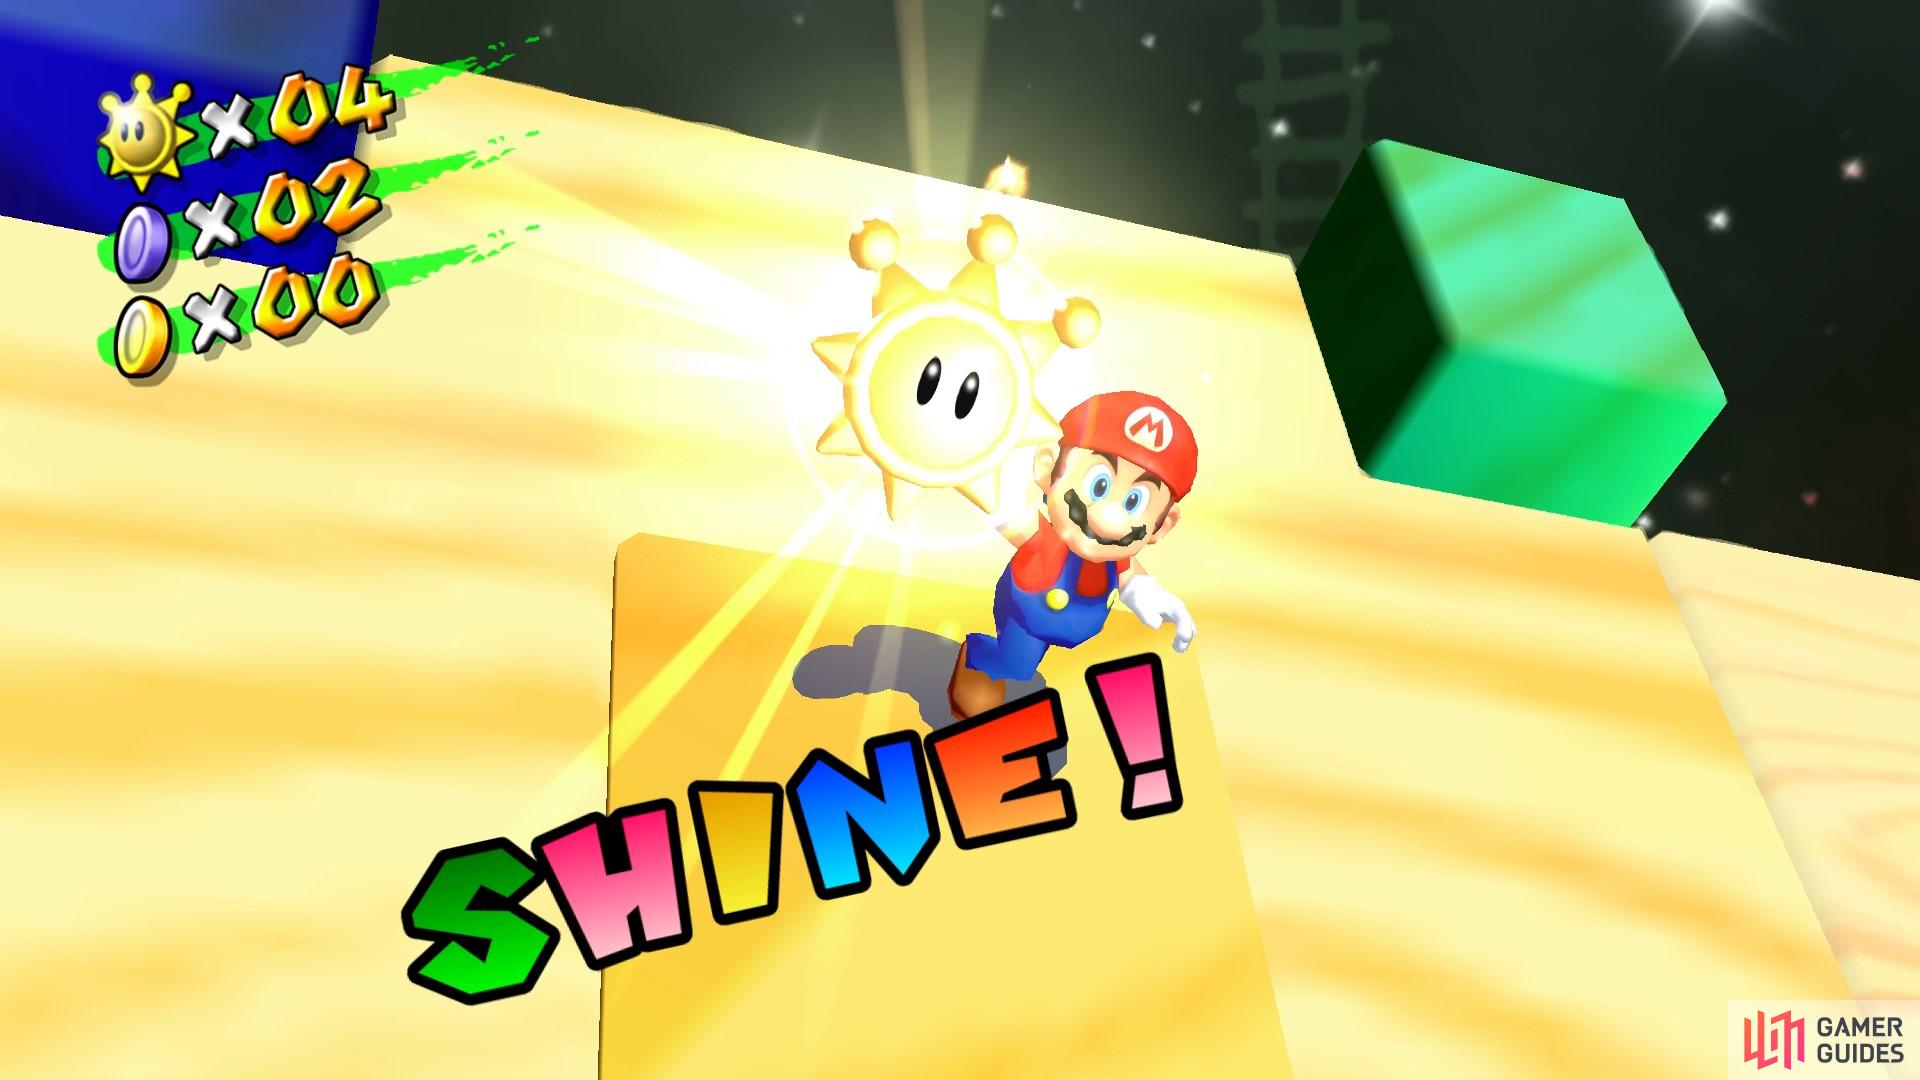 When you make it to the end of the obstacle course, you'll be able to grab the Shine Sprite.